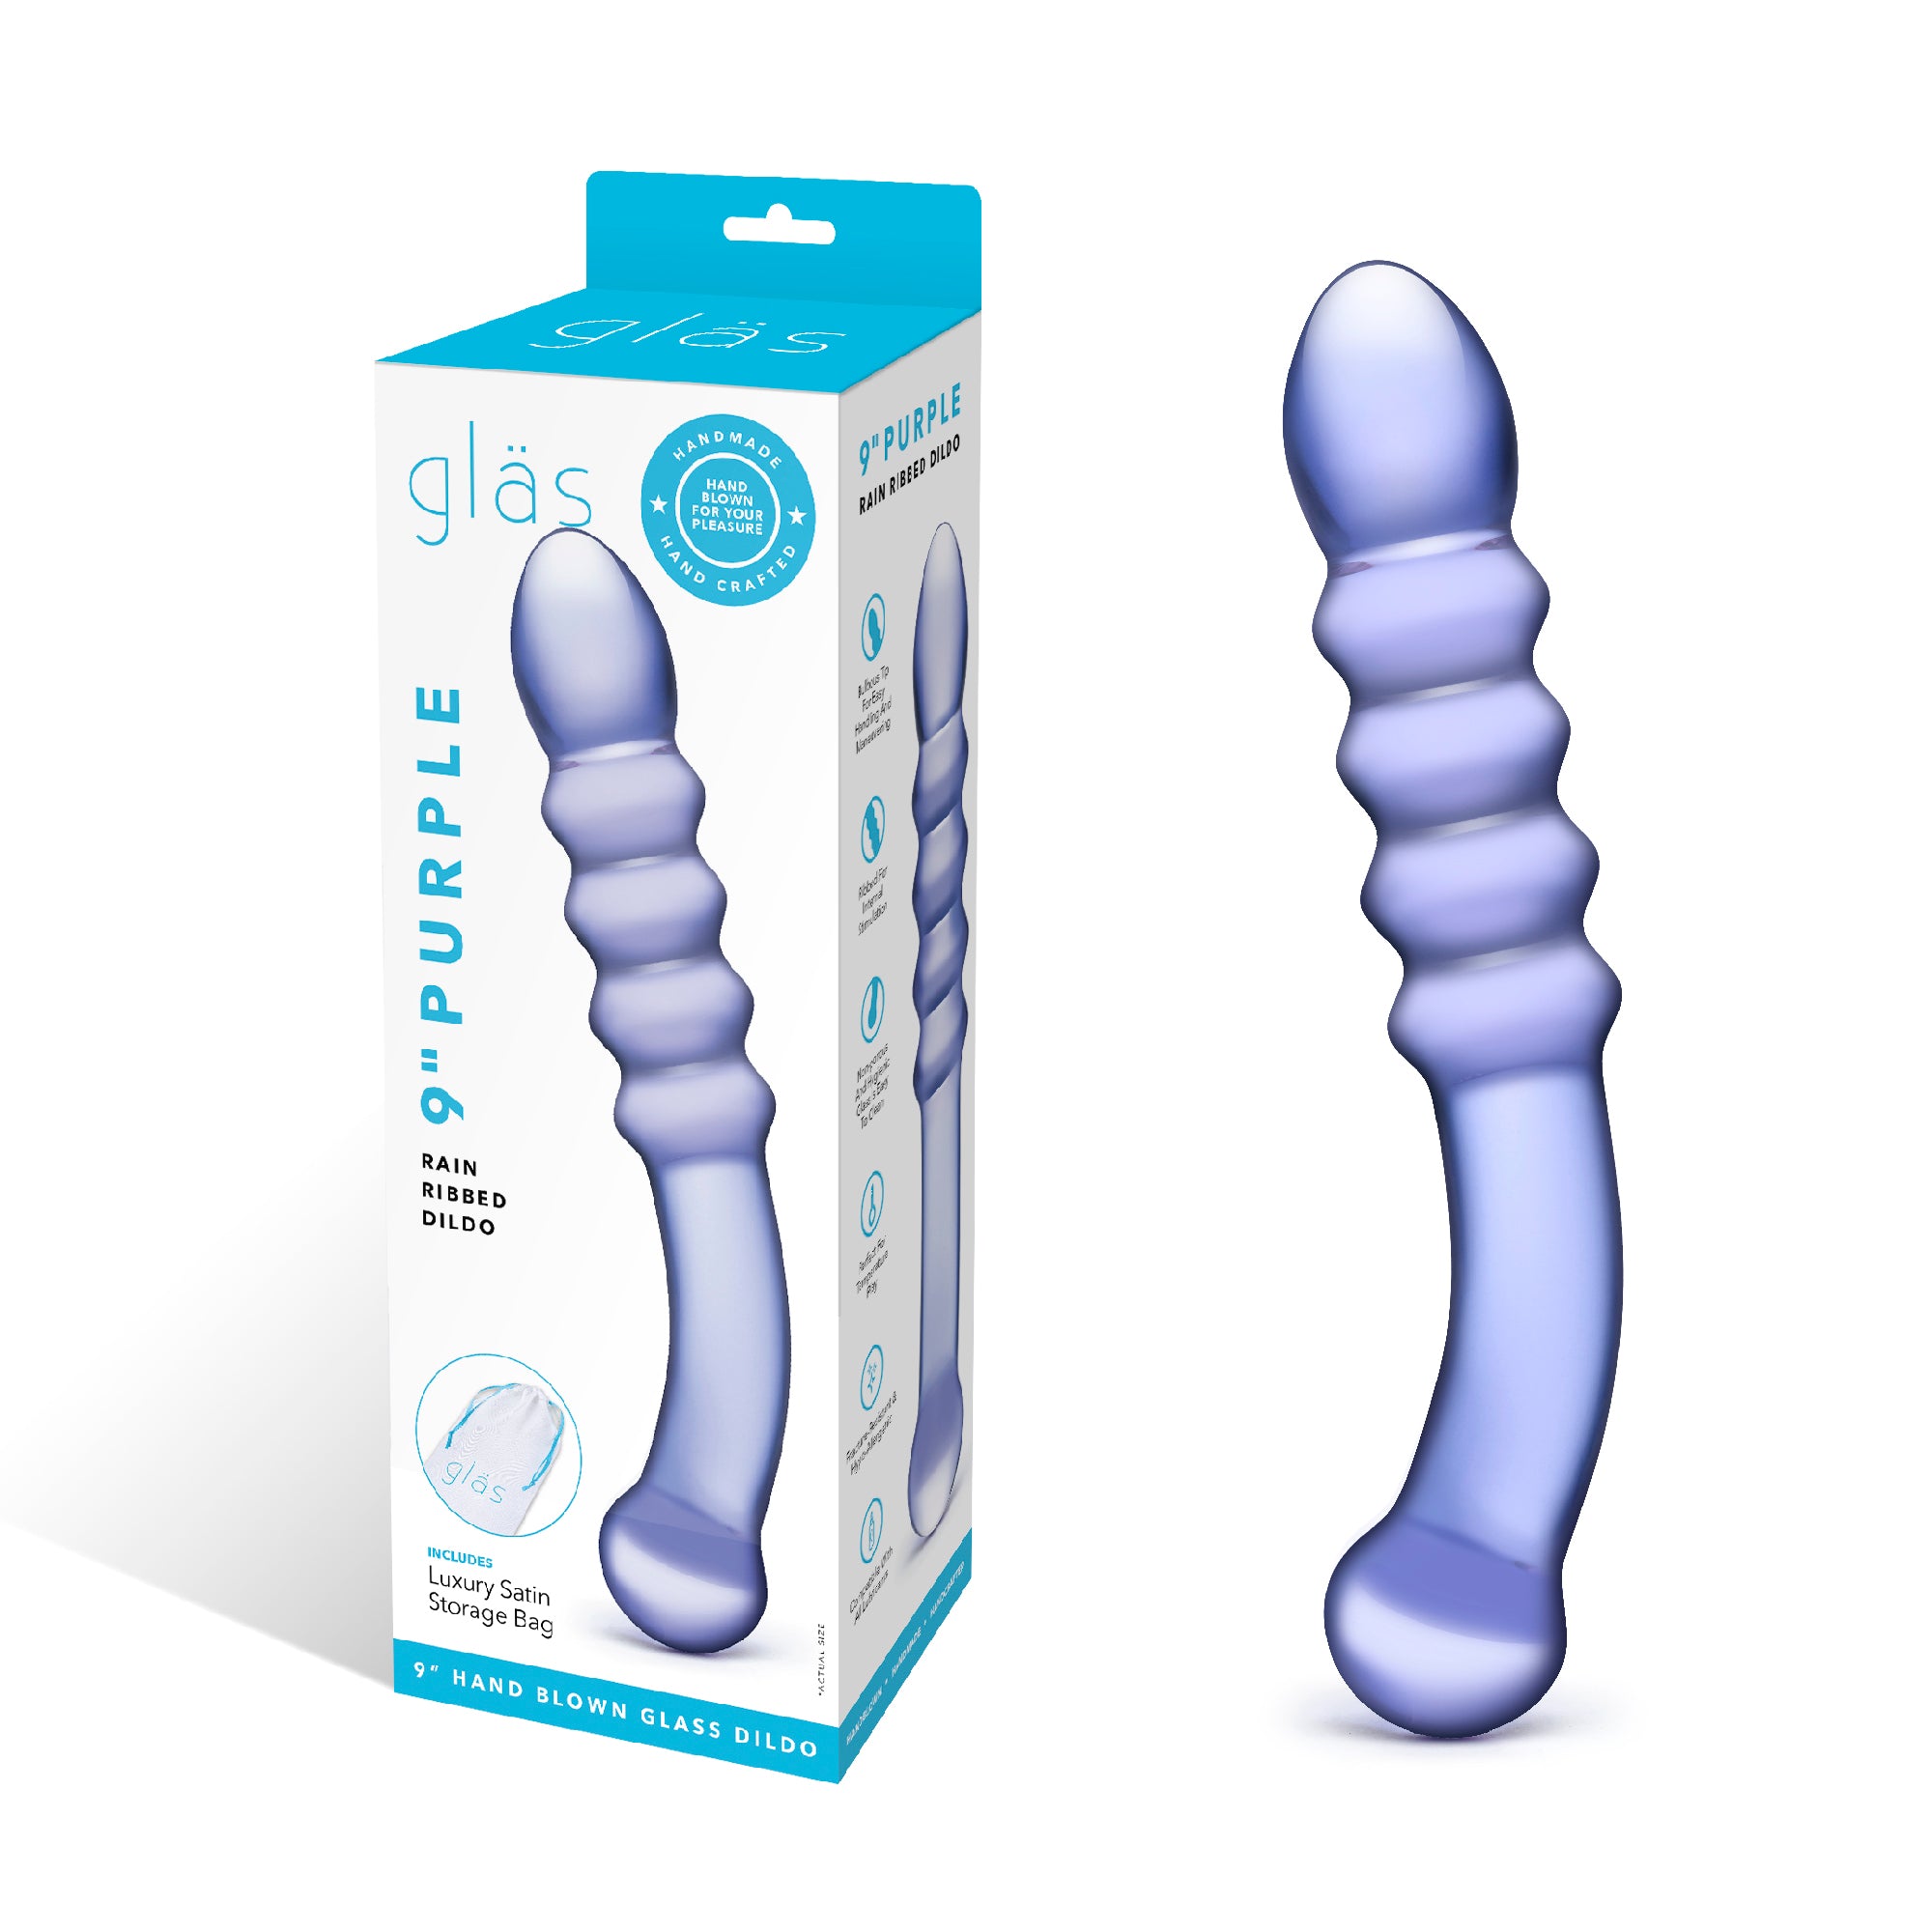 Specifications of the Gläs Triple Play Beaded Glass Butt Plug